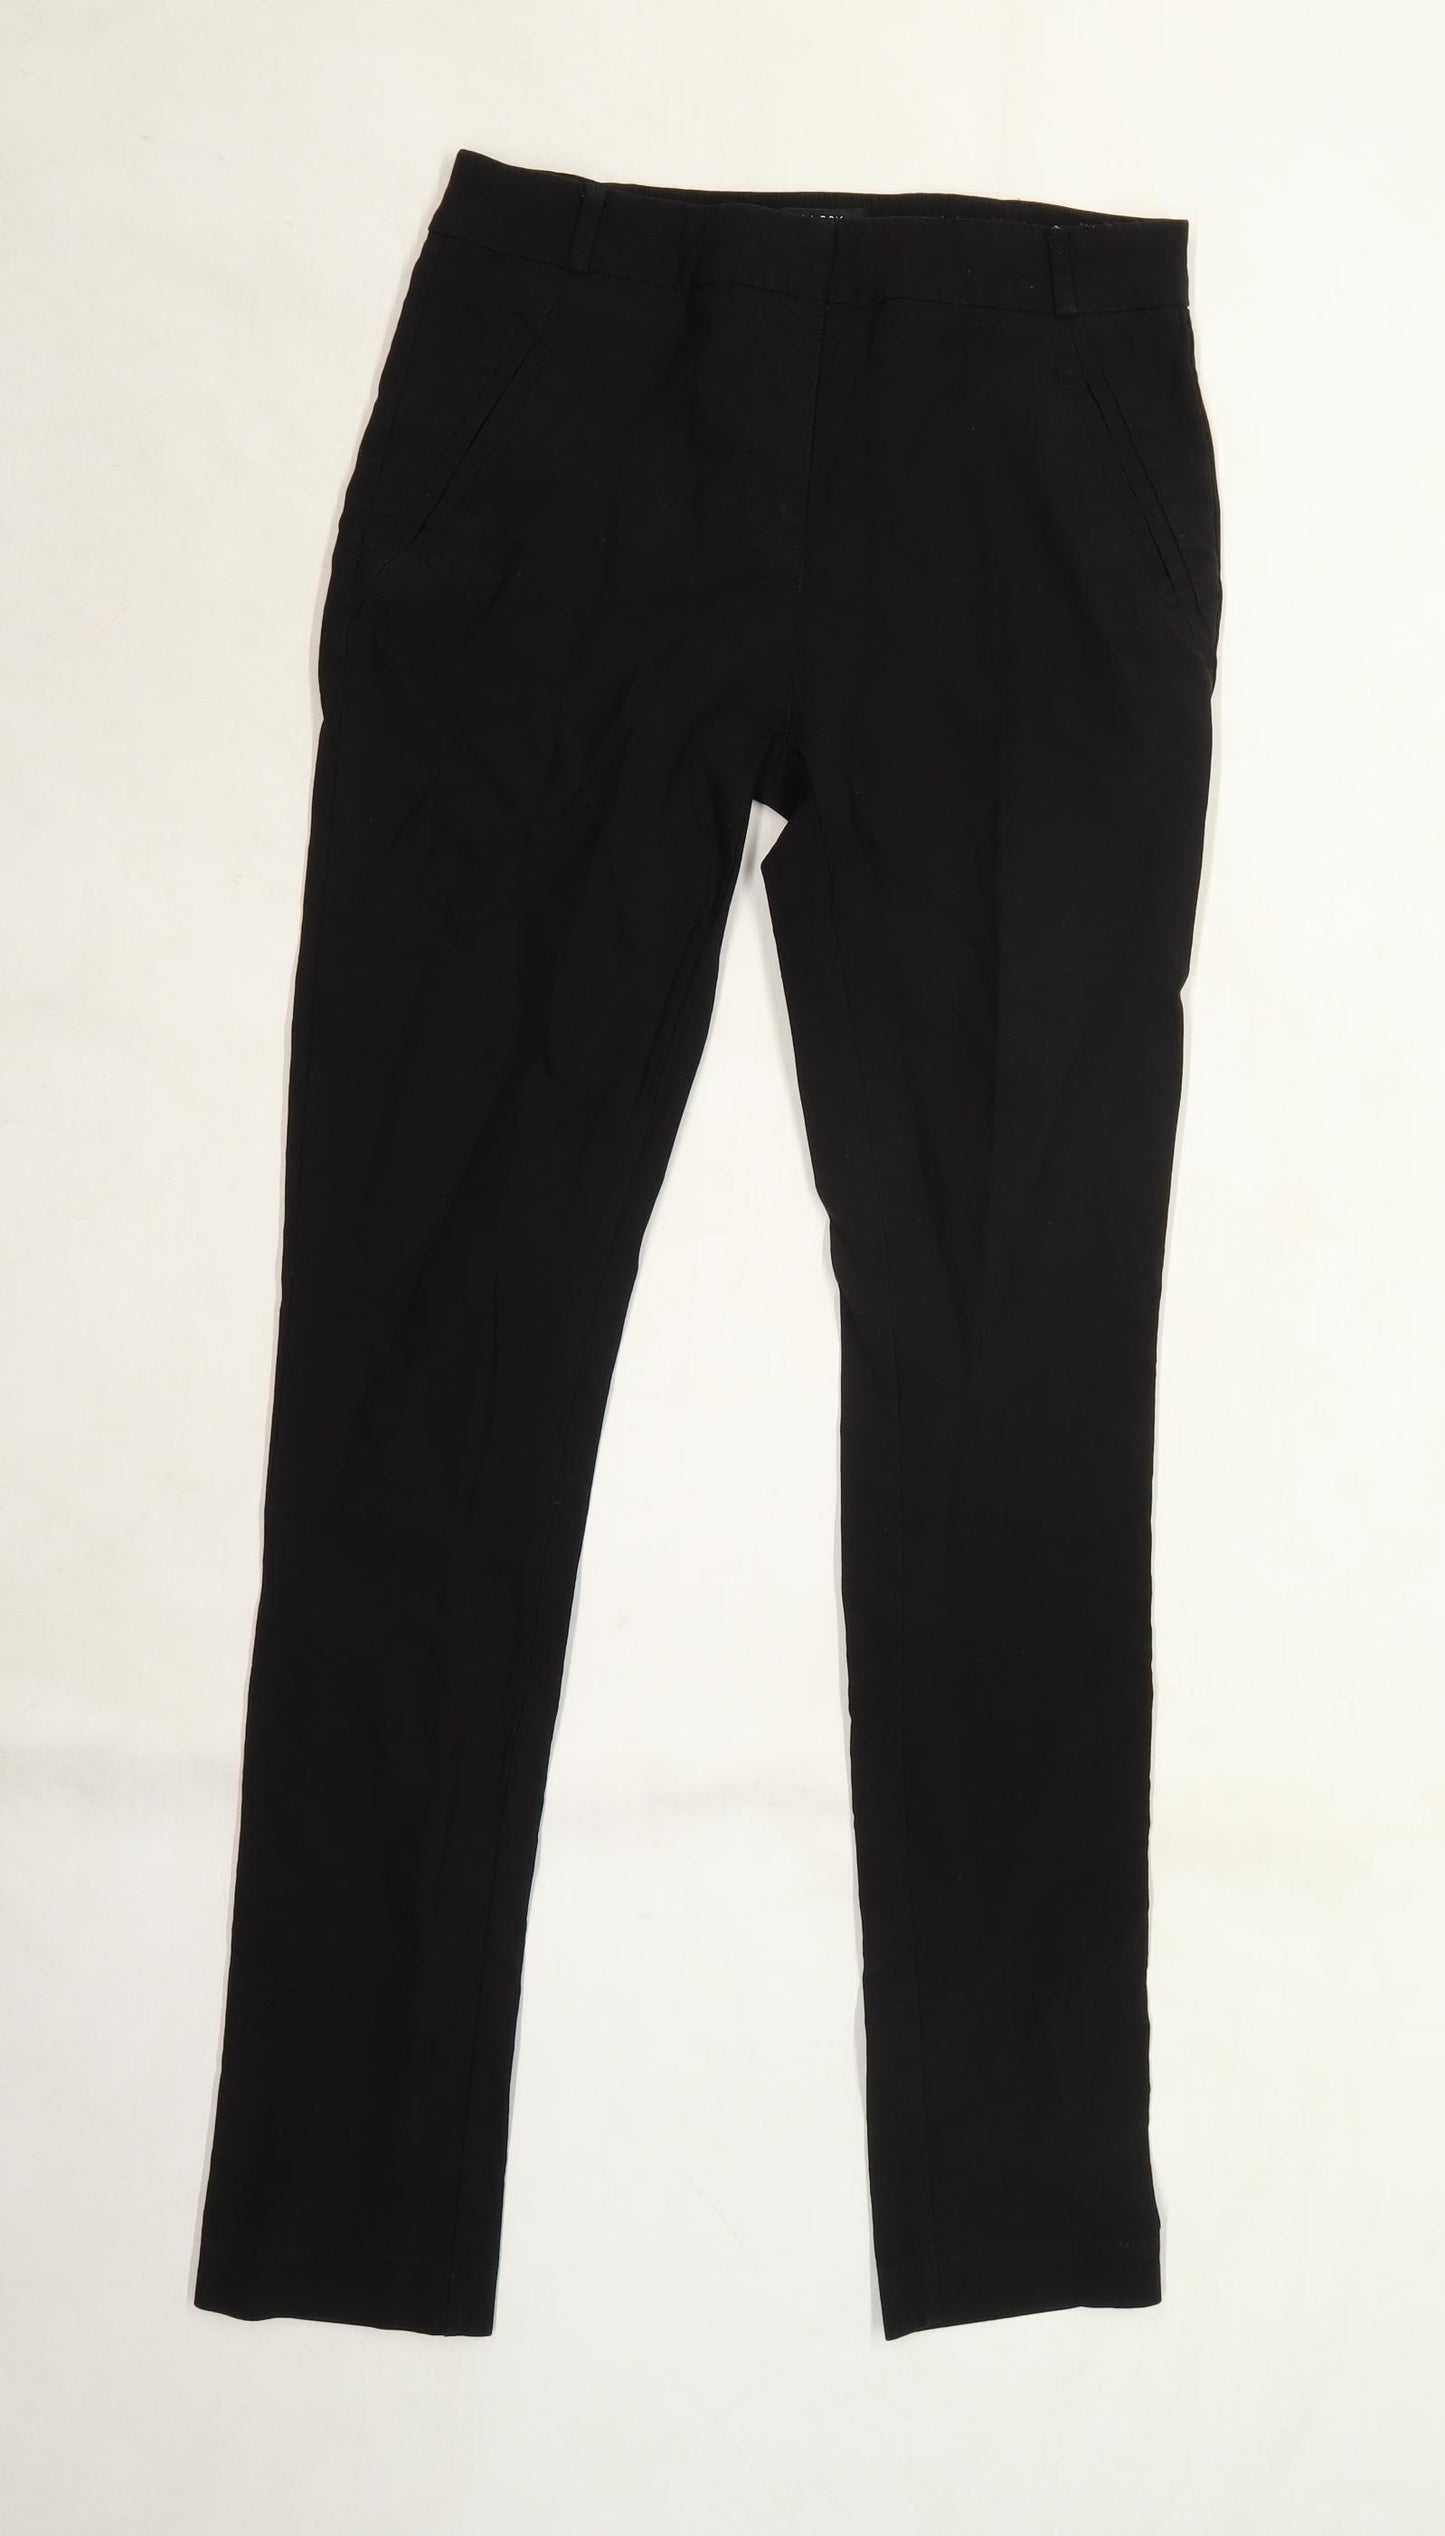 New Look Girls Black   Jegging Trousers Size 14 Years